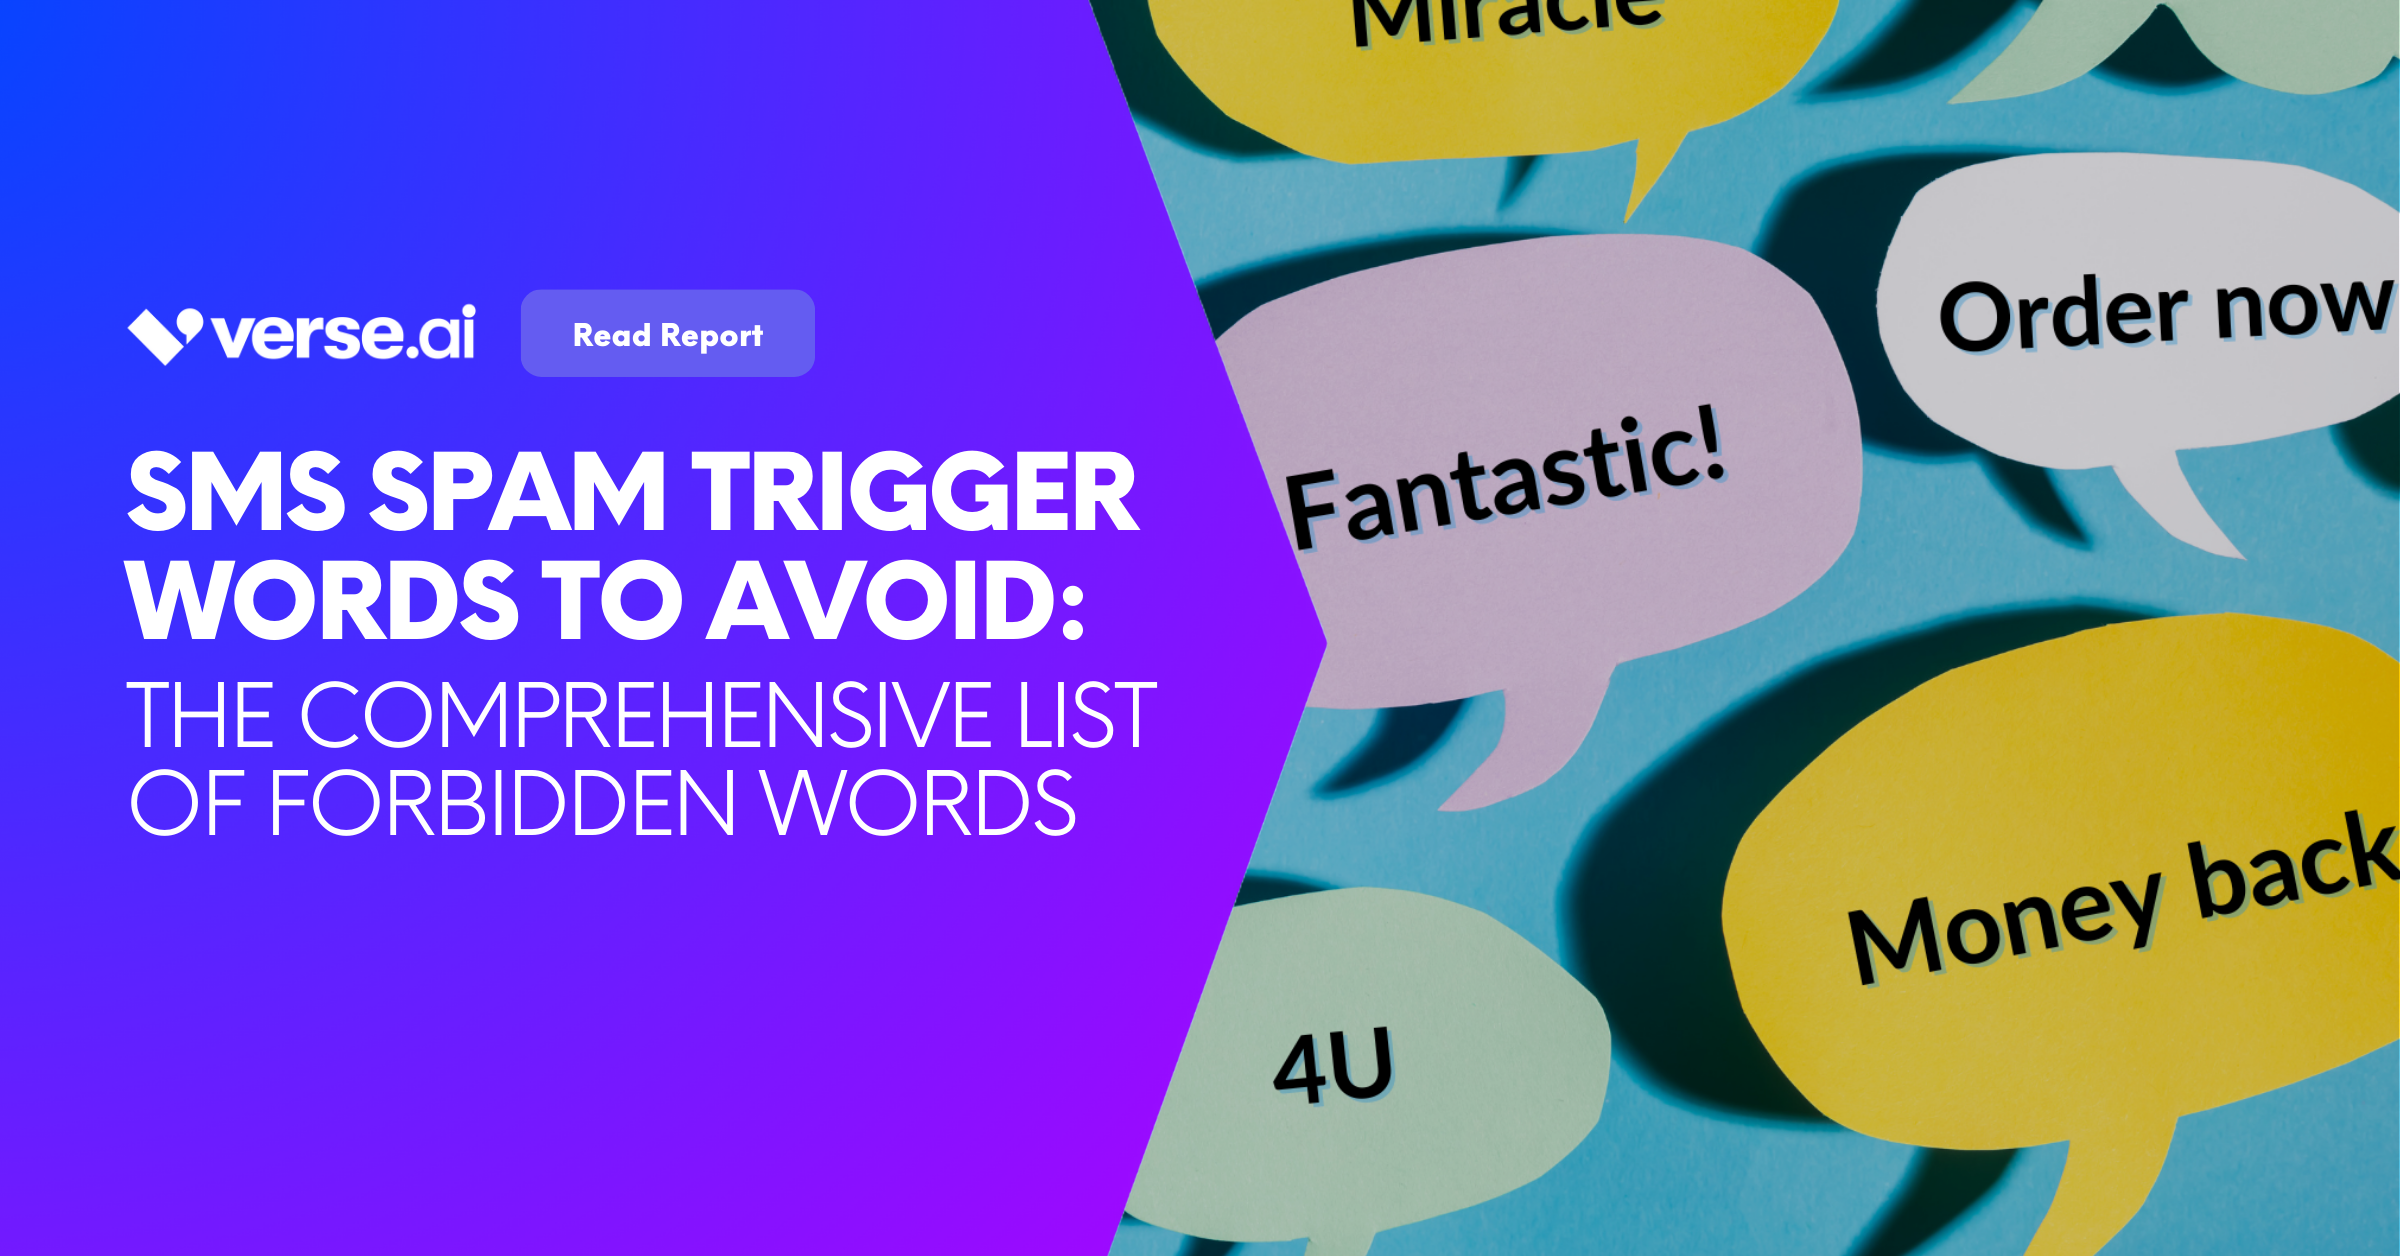 SMS Spam Trigger Words to Avoid - report cover